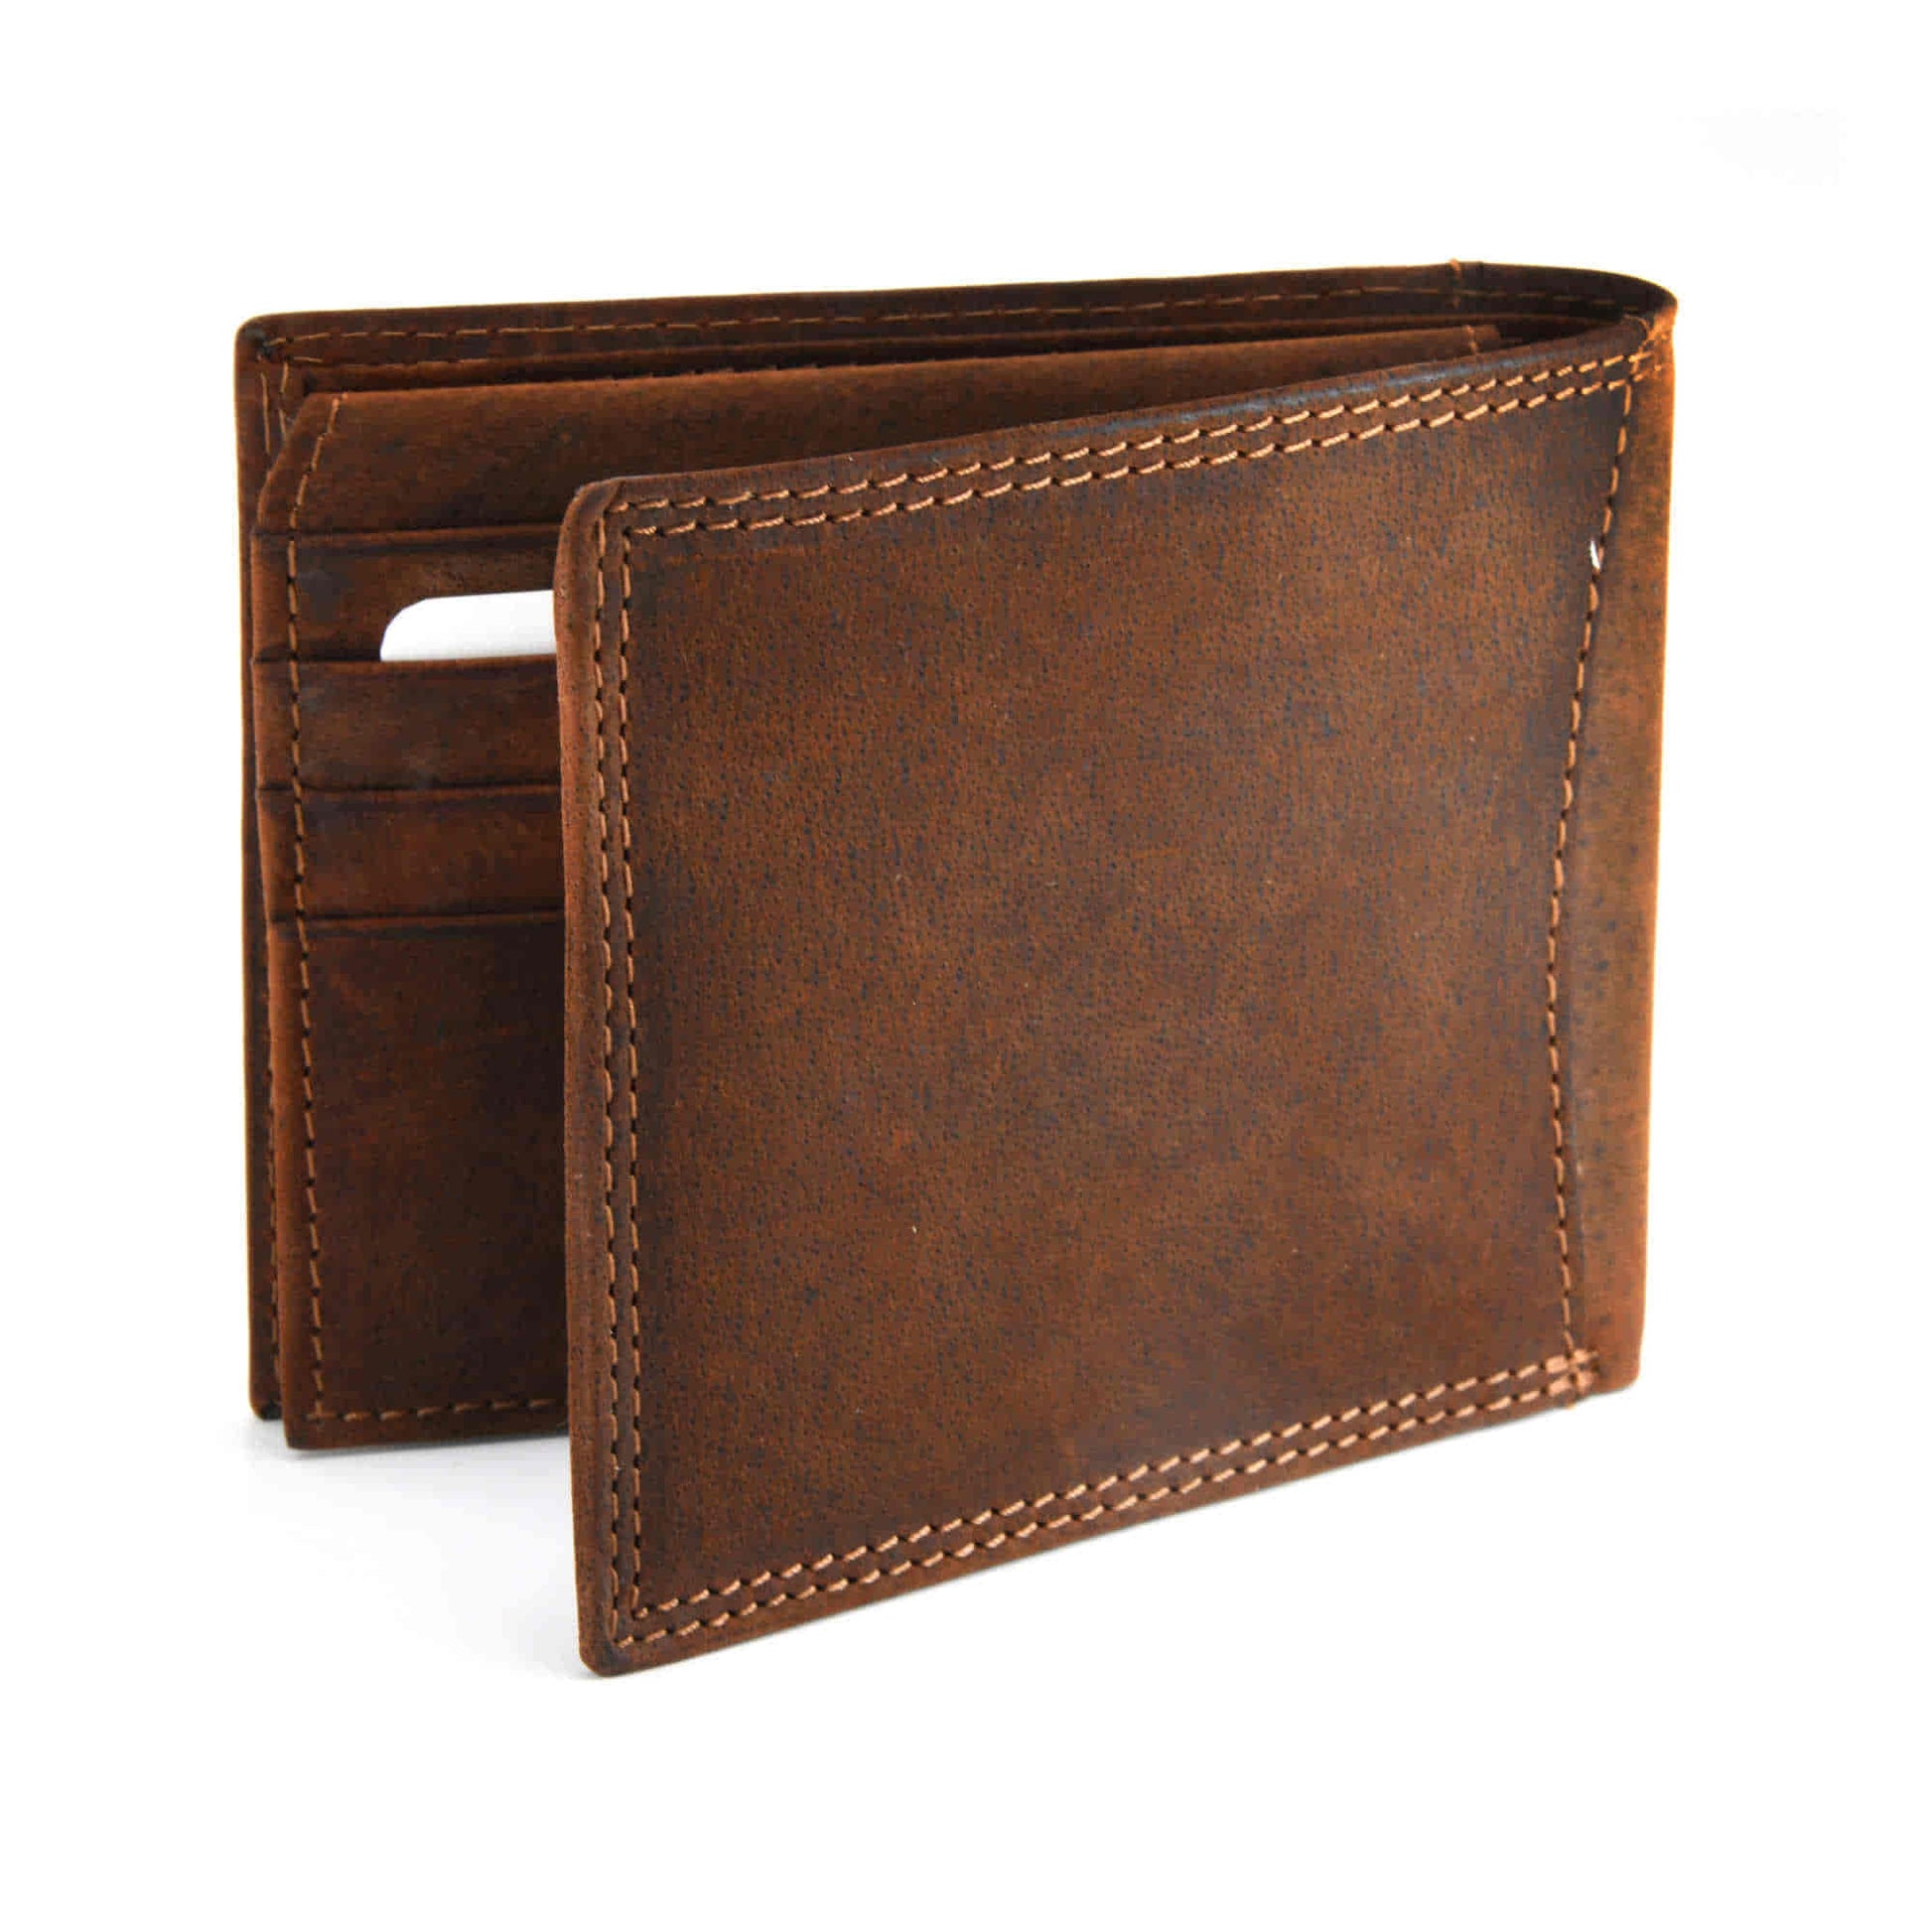 Style n Craft 300796-BR Bi-Fold PassCase Wallet with Flap in Full Grain Vintage Look Leather - brown color - closed view back